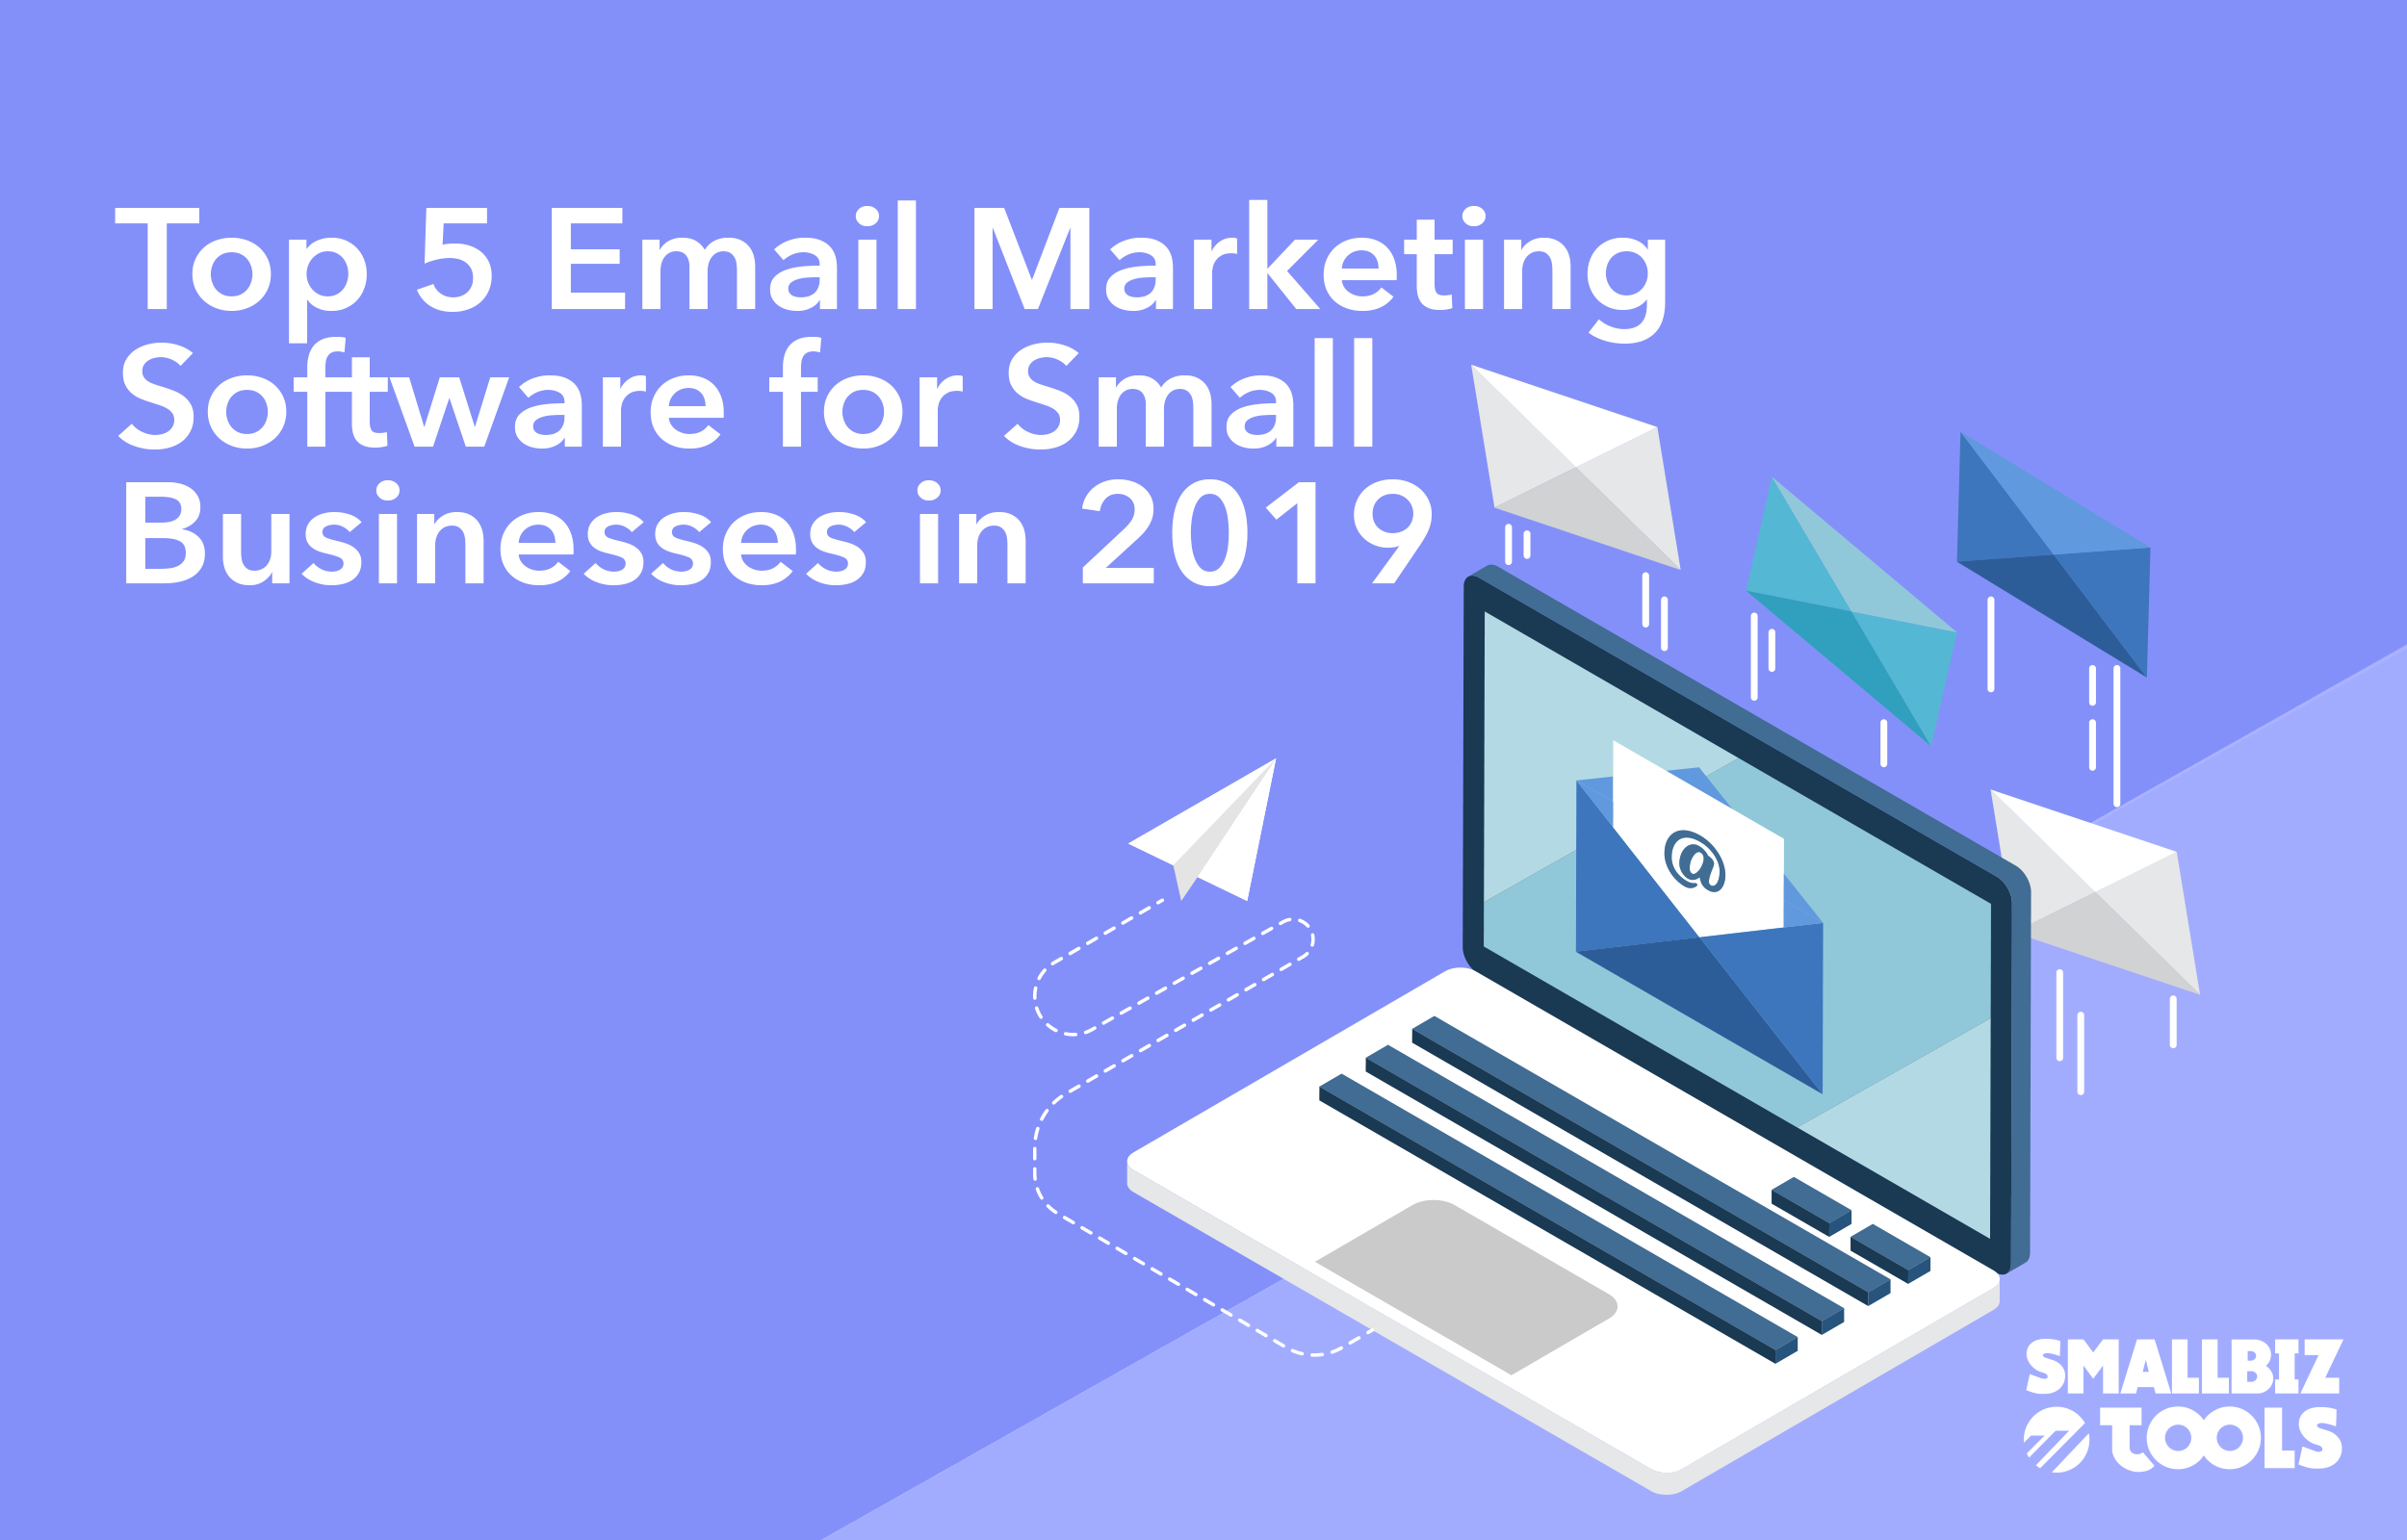 small business email marketing software